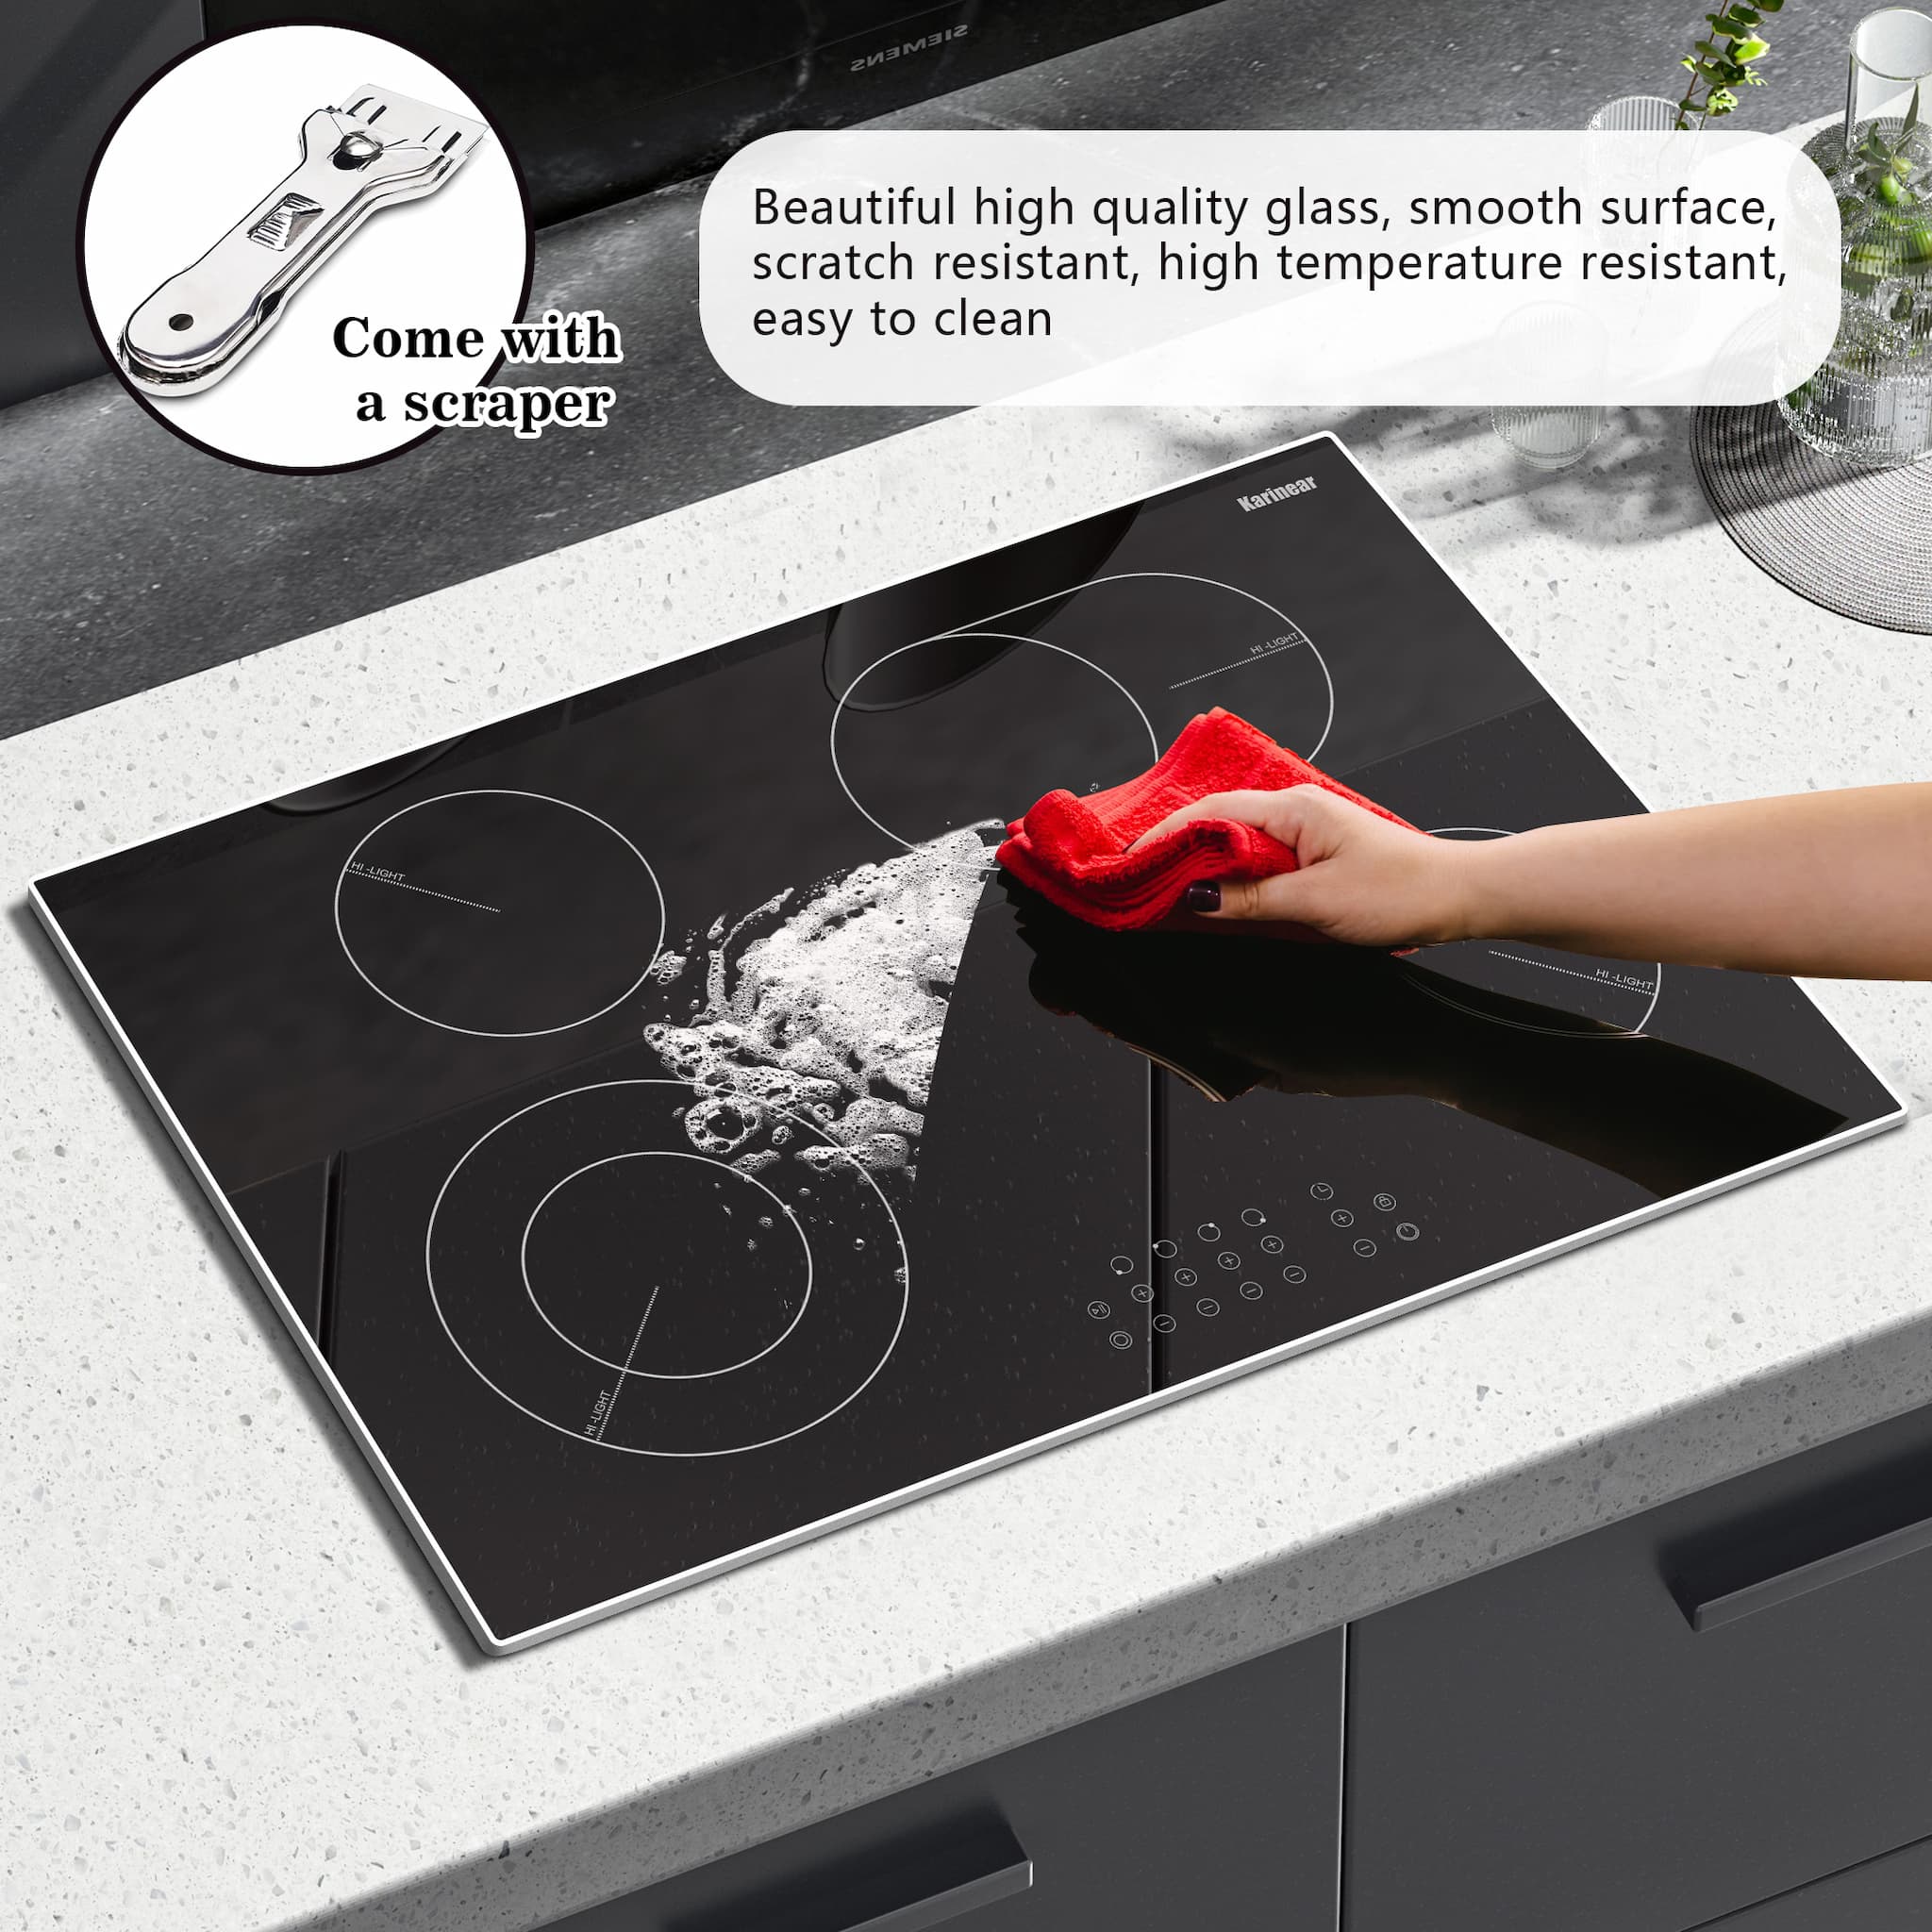 The smooth,sleek surface of this glass ceramic cooktops means is it hard to hide the dust. So you can spend less time to clean and more time enjoying food.